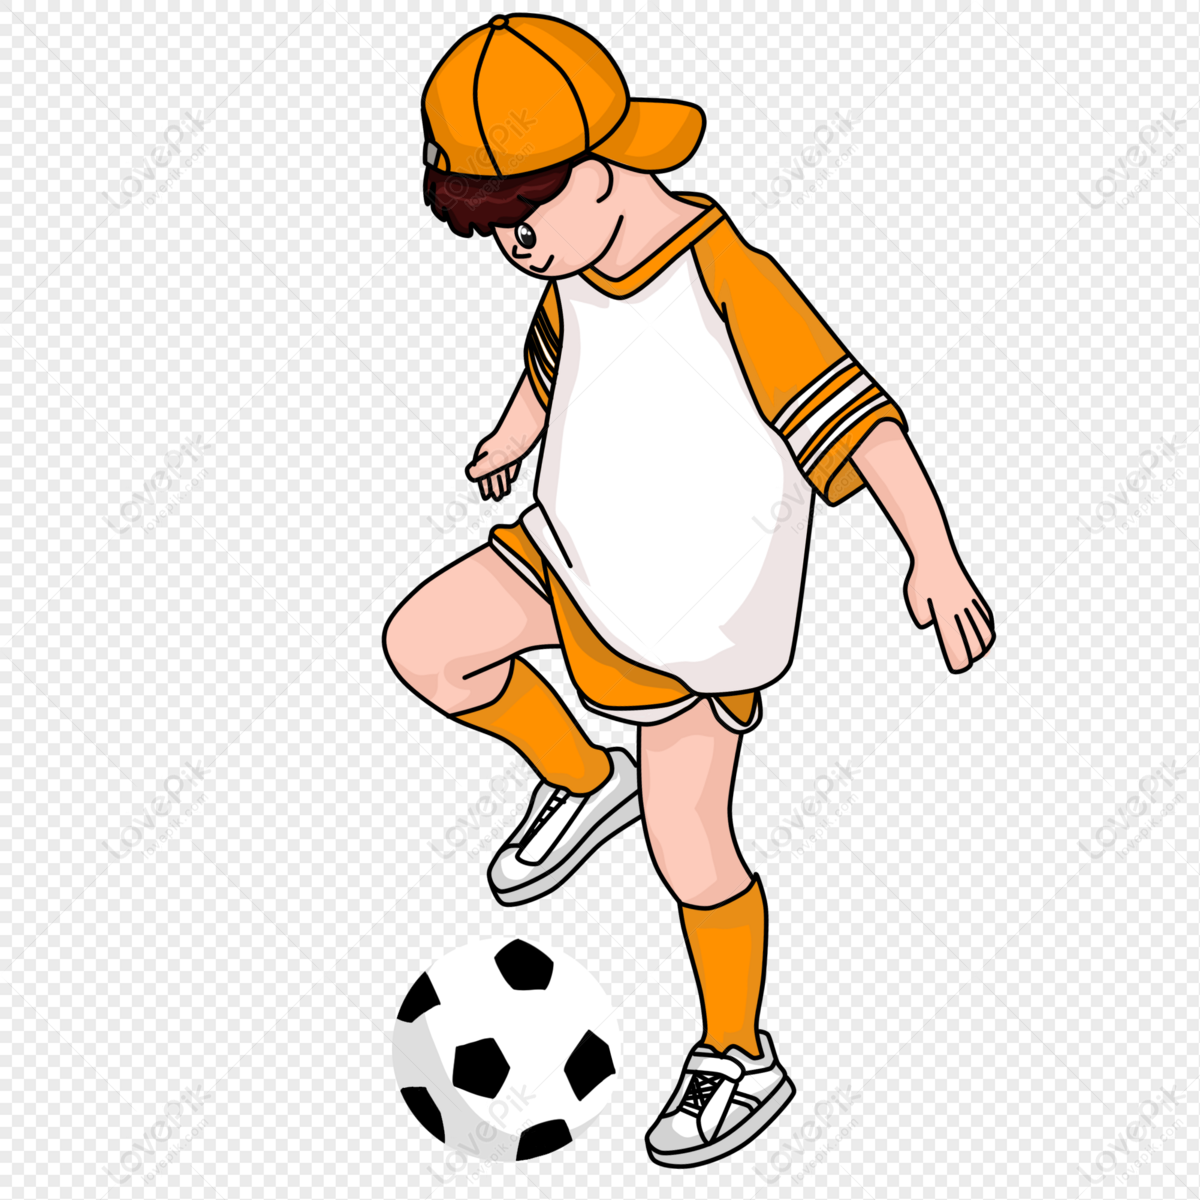 to play soccer clipart